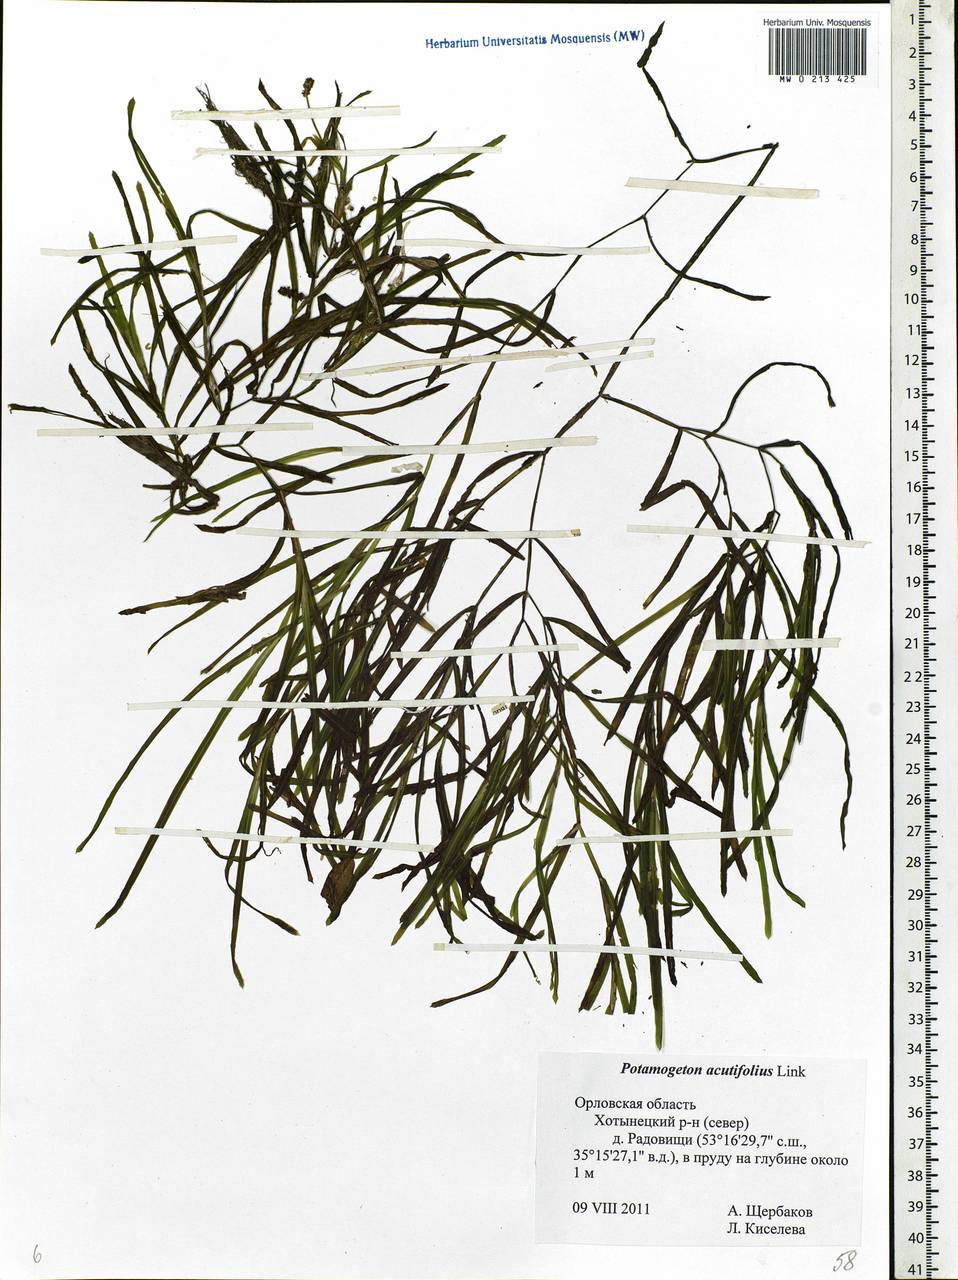 Potamogeton acutifolius Link ex Roem. & Schult., Eastern Europe, Central forest-and-steppe region (E6) (Russia)